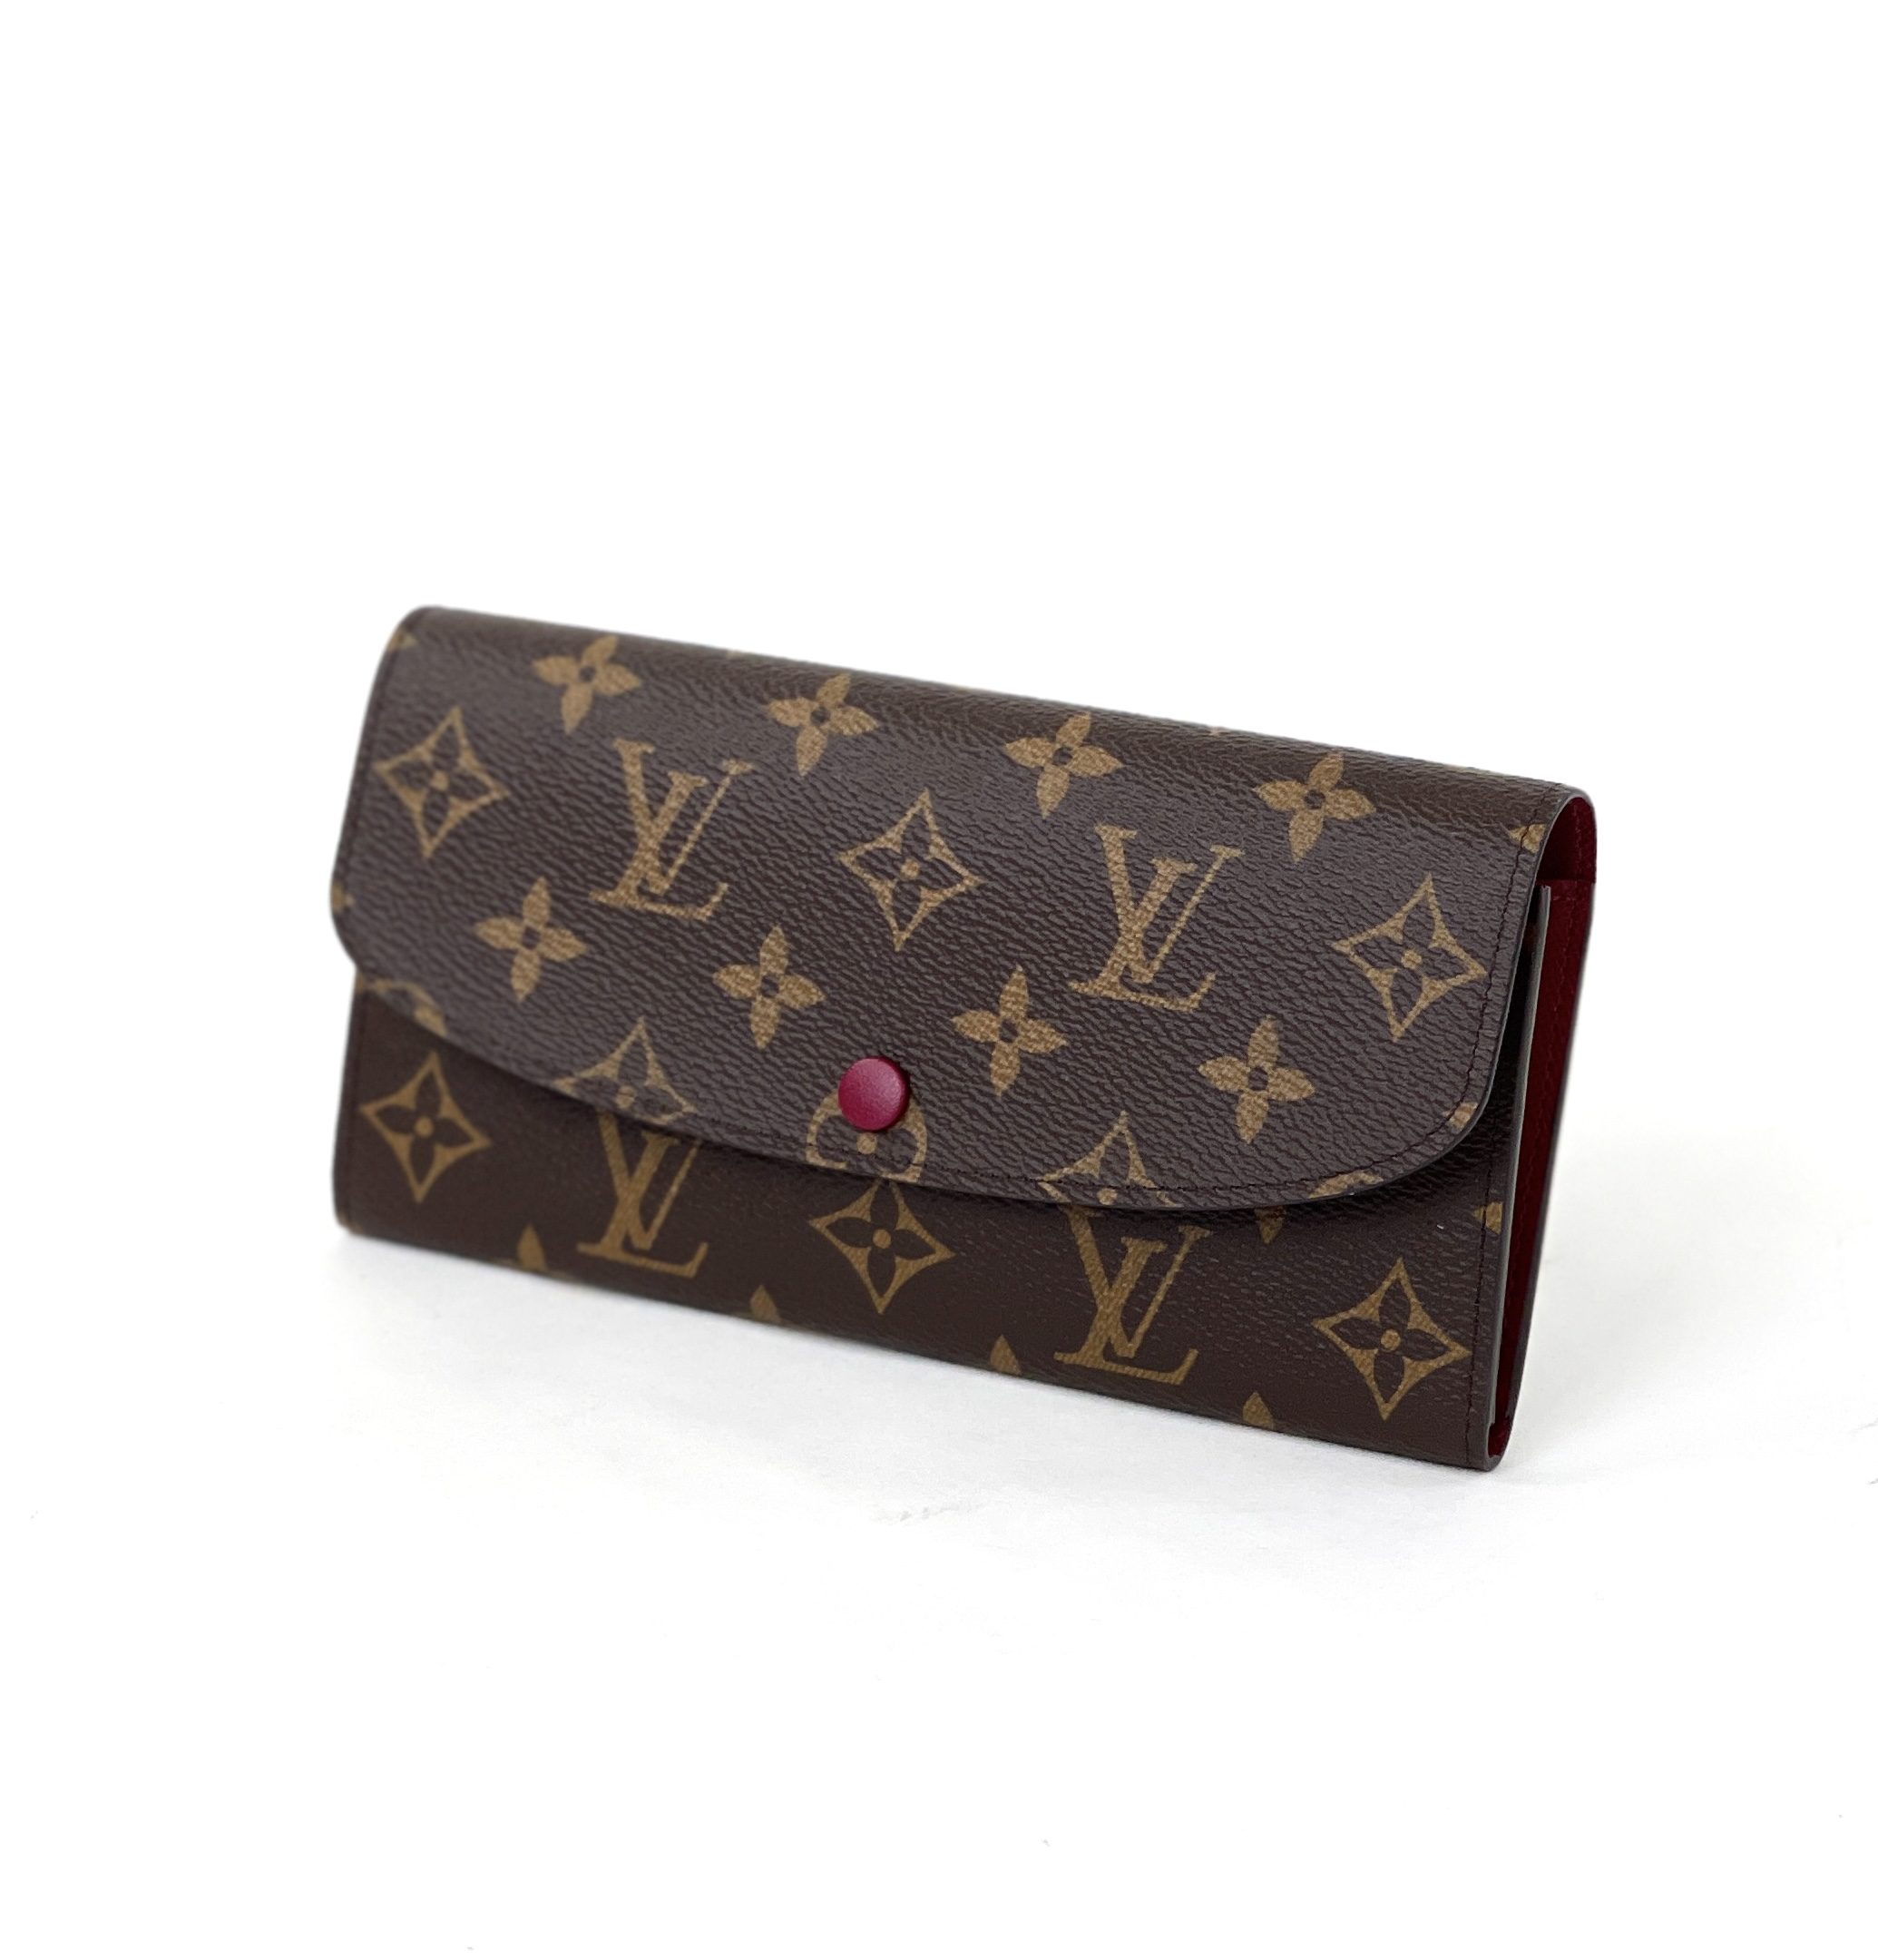 Emilie Wallet Monogram Canvas - Wallets and Small Leather Goods M60697